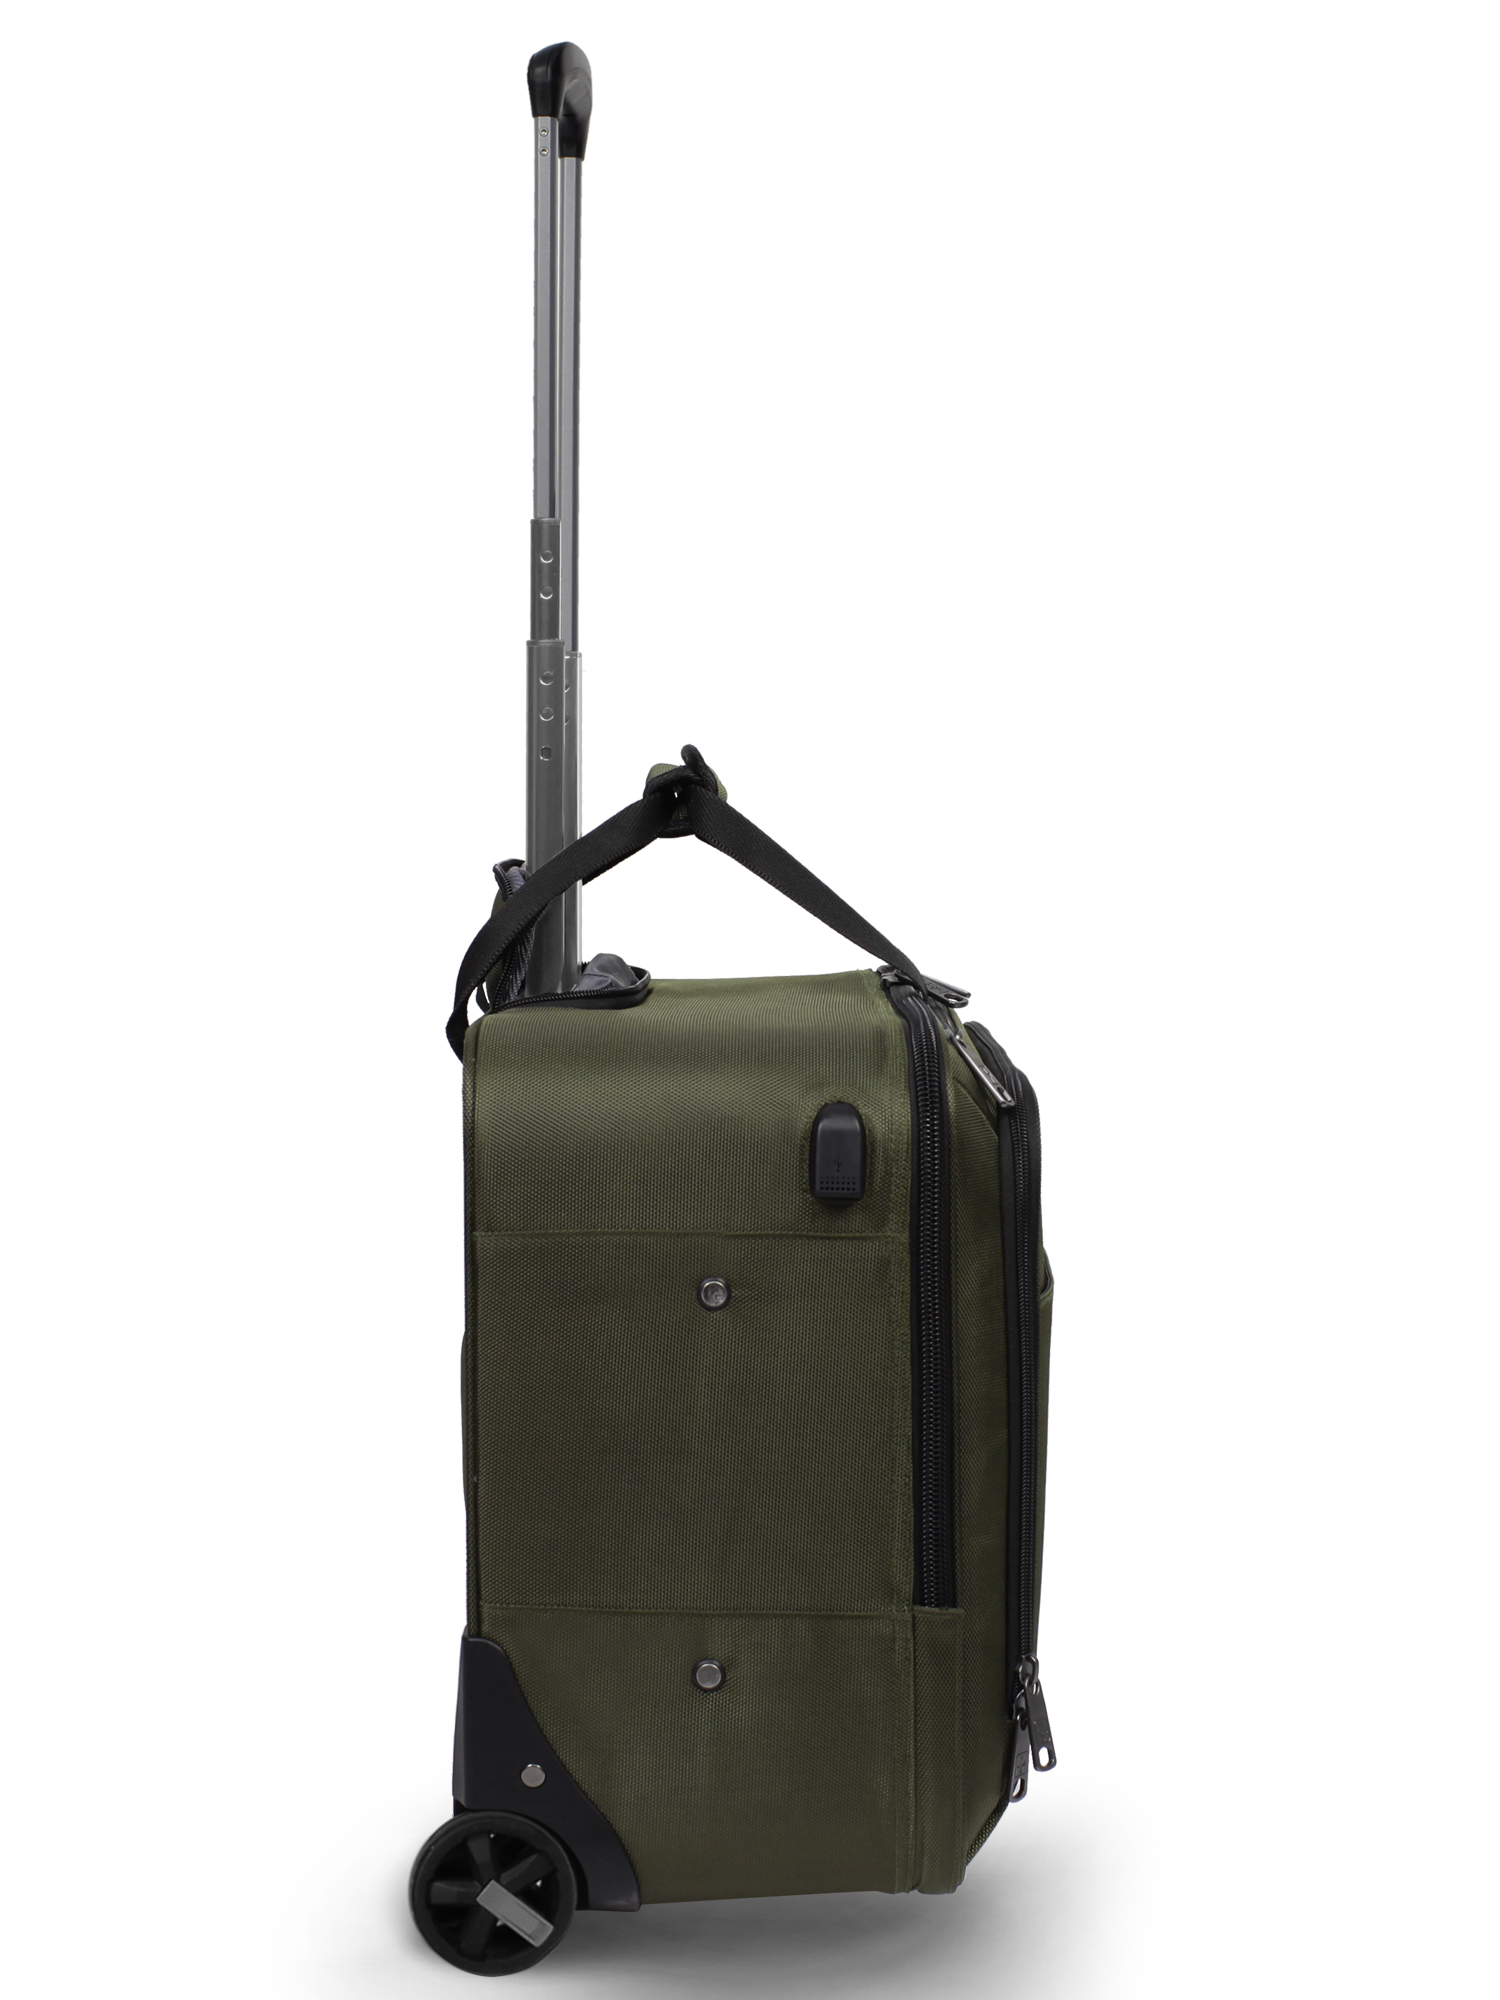 SwissTech Urban Trek 16.5" Under-seater Carry On Luggage, Olive (Walmart Exclusive) - image 5 of 12